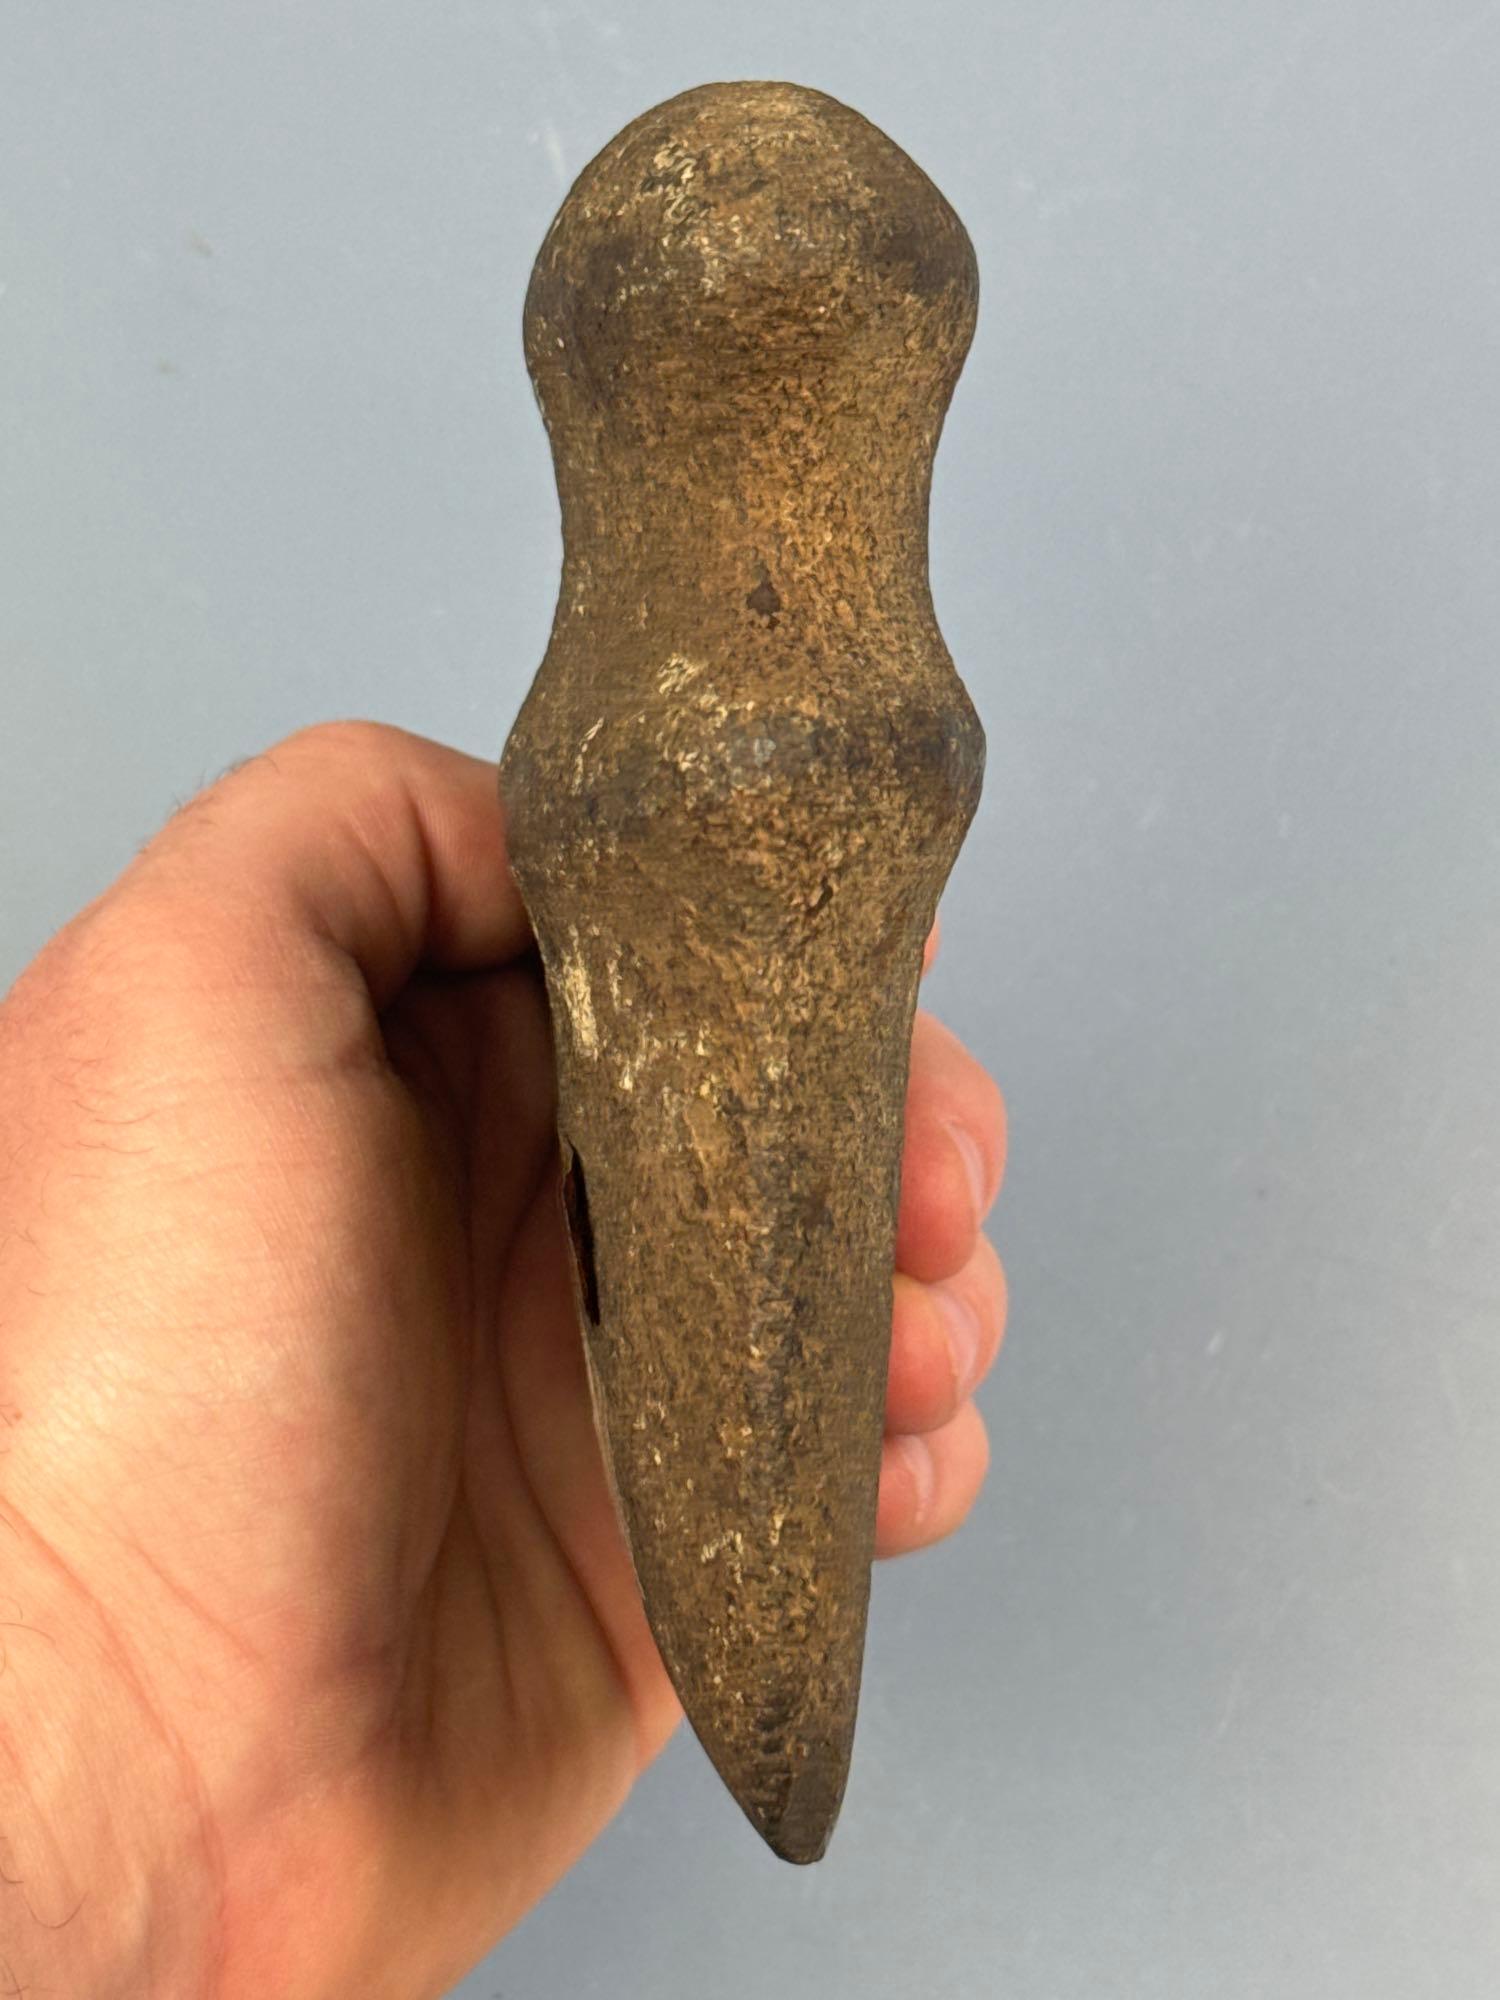 SUPERB 5 3/4" Miami River Axe, Full Groove, Found in Tennessee, Ex: PAYNE, Reed, Hendershot Collecti